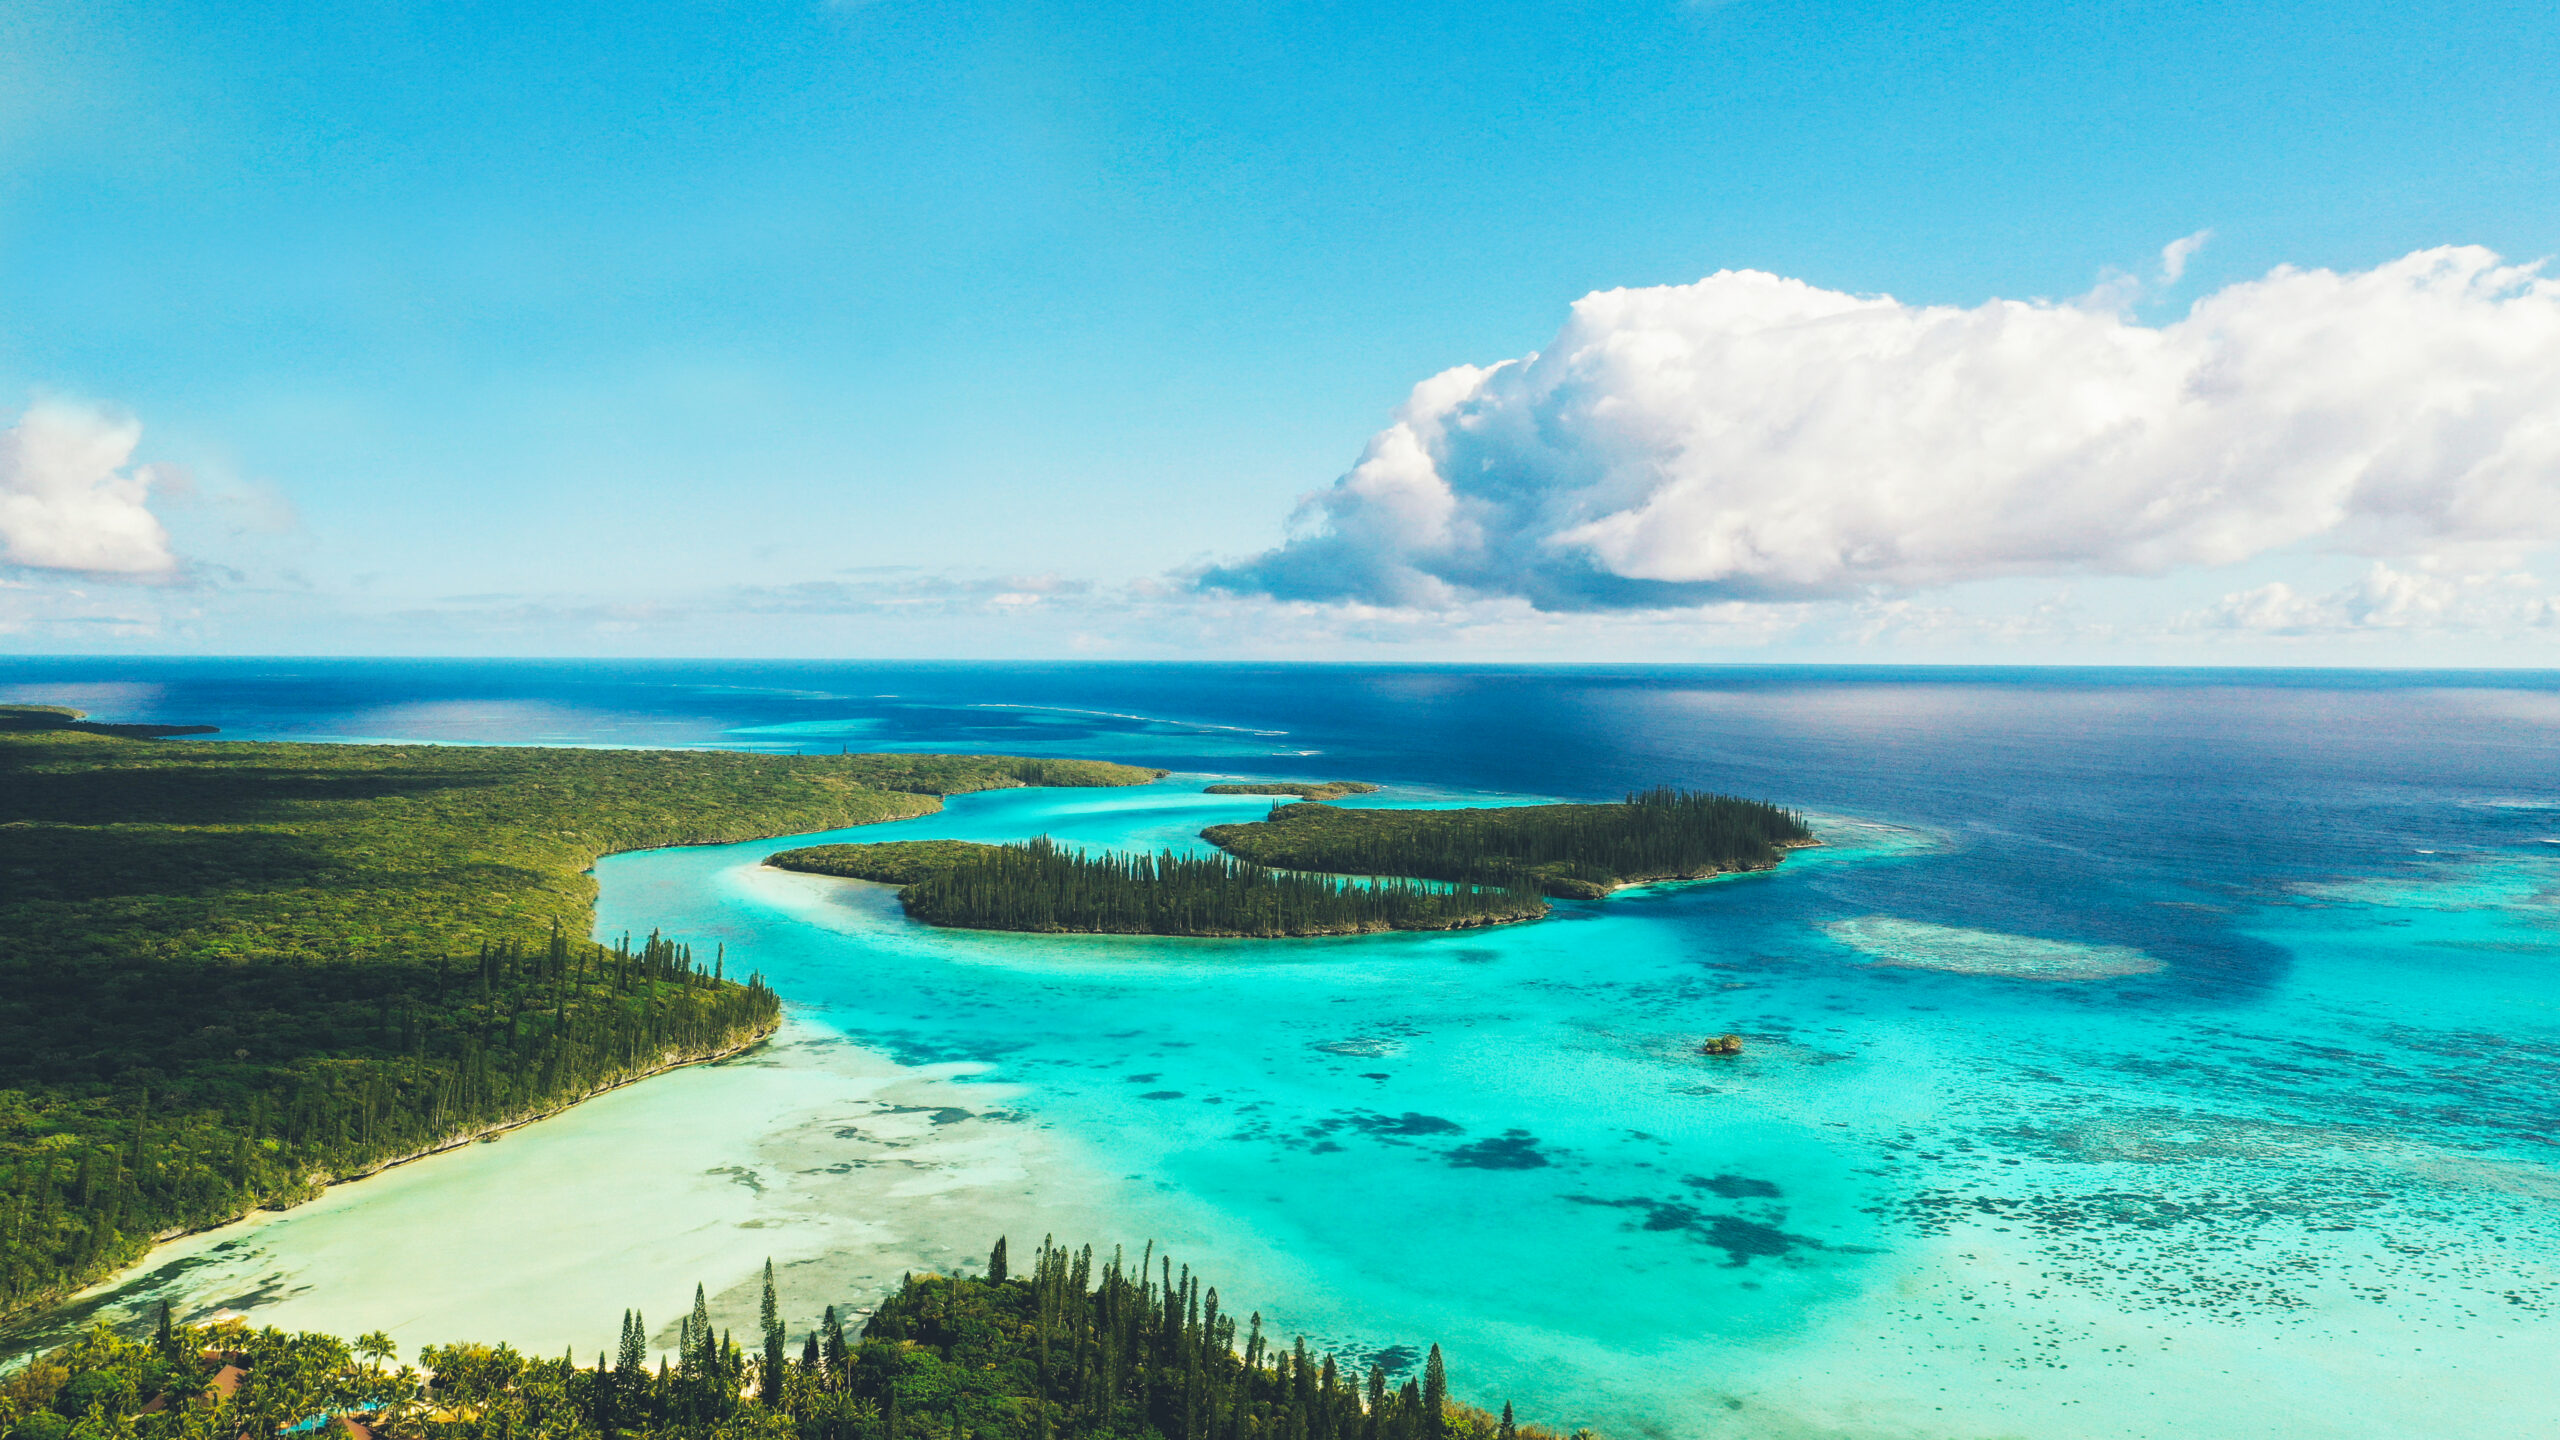 A New Caledonian escape is not complete without a visit to the Isle of Pines, known as the 'Jewel of the Pacific'.